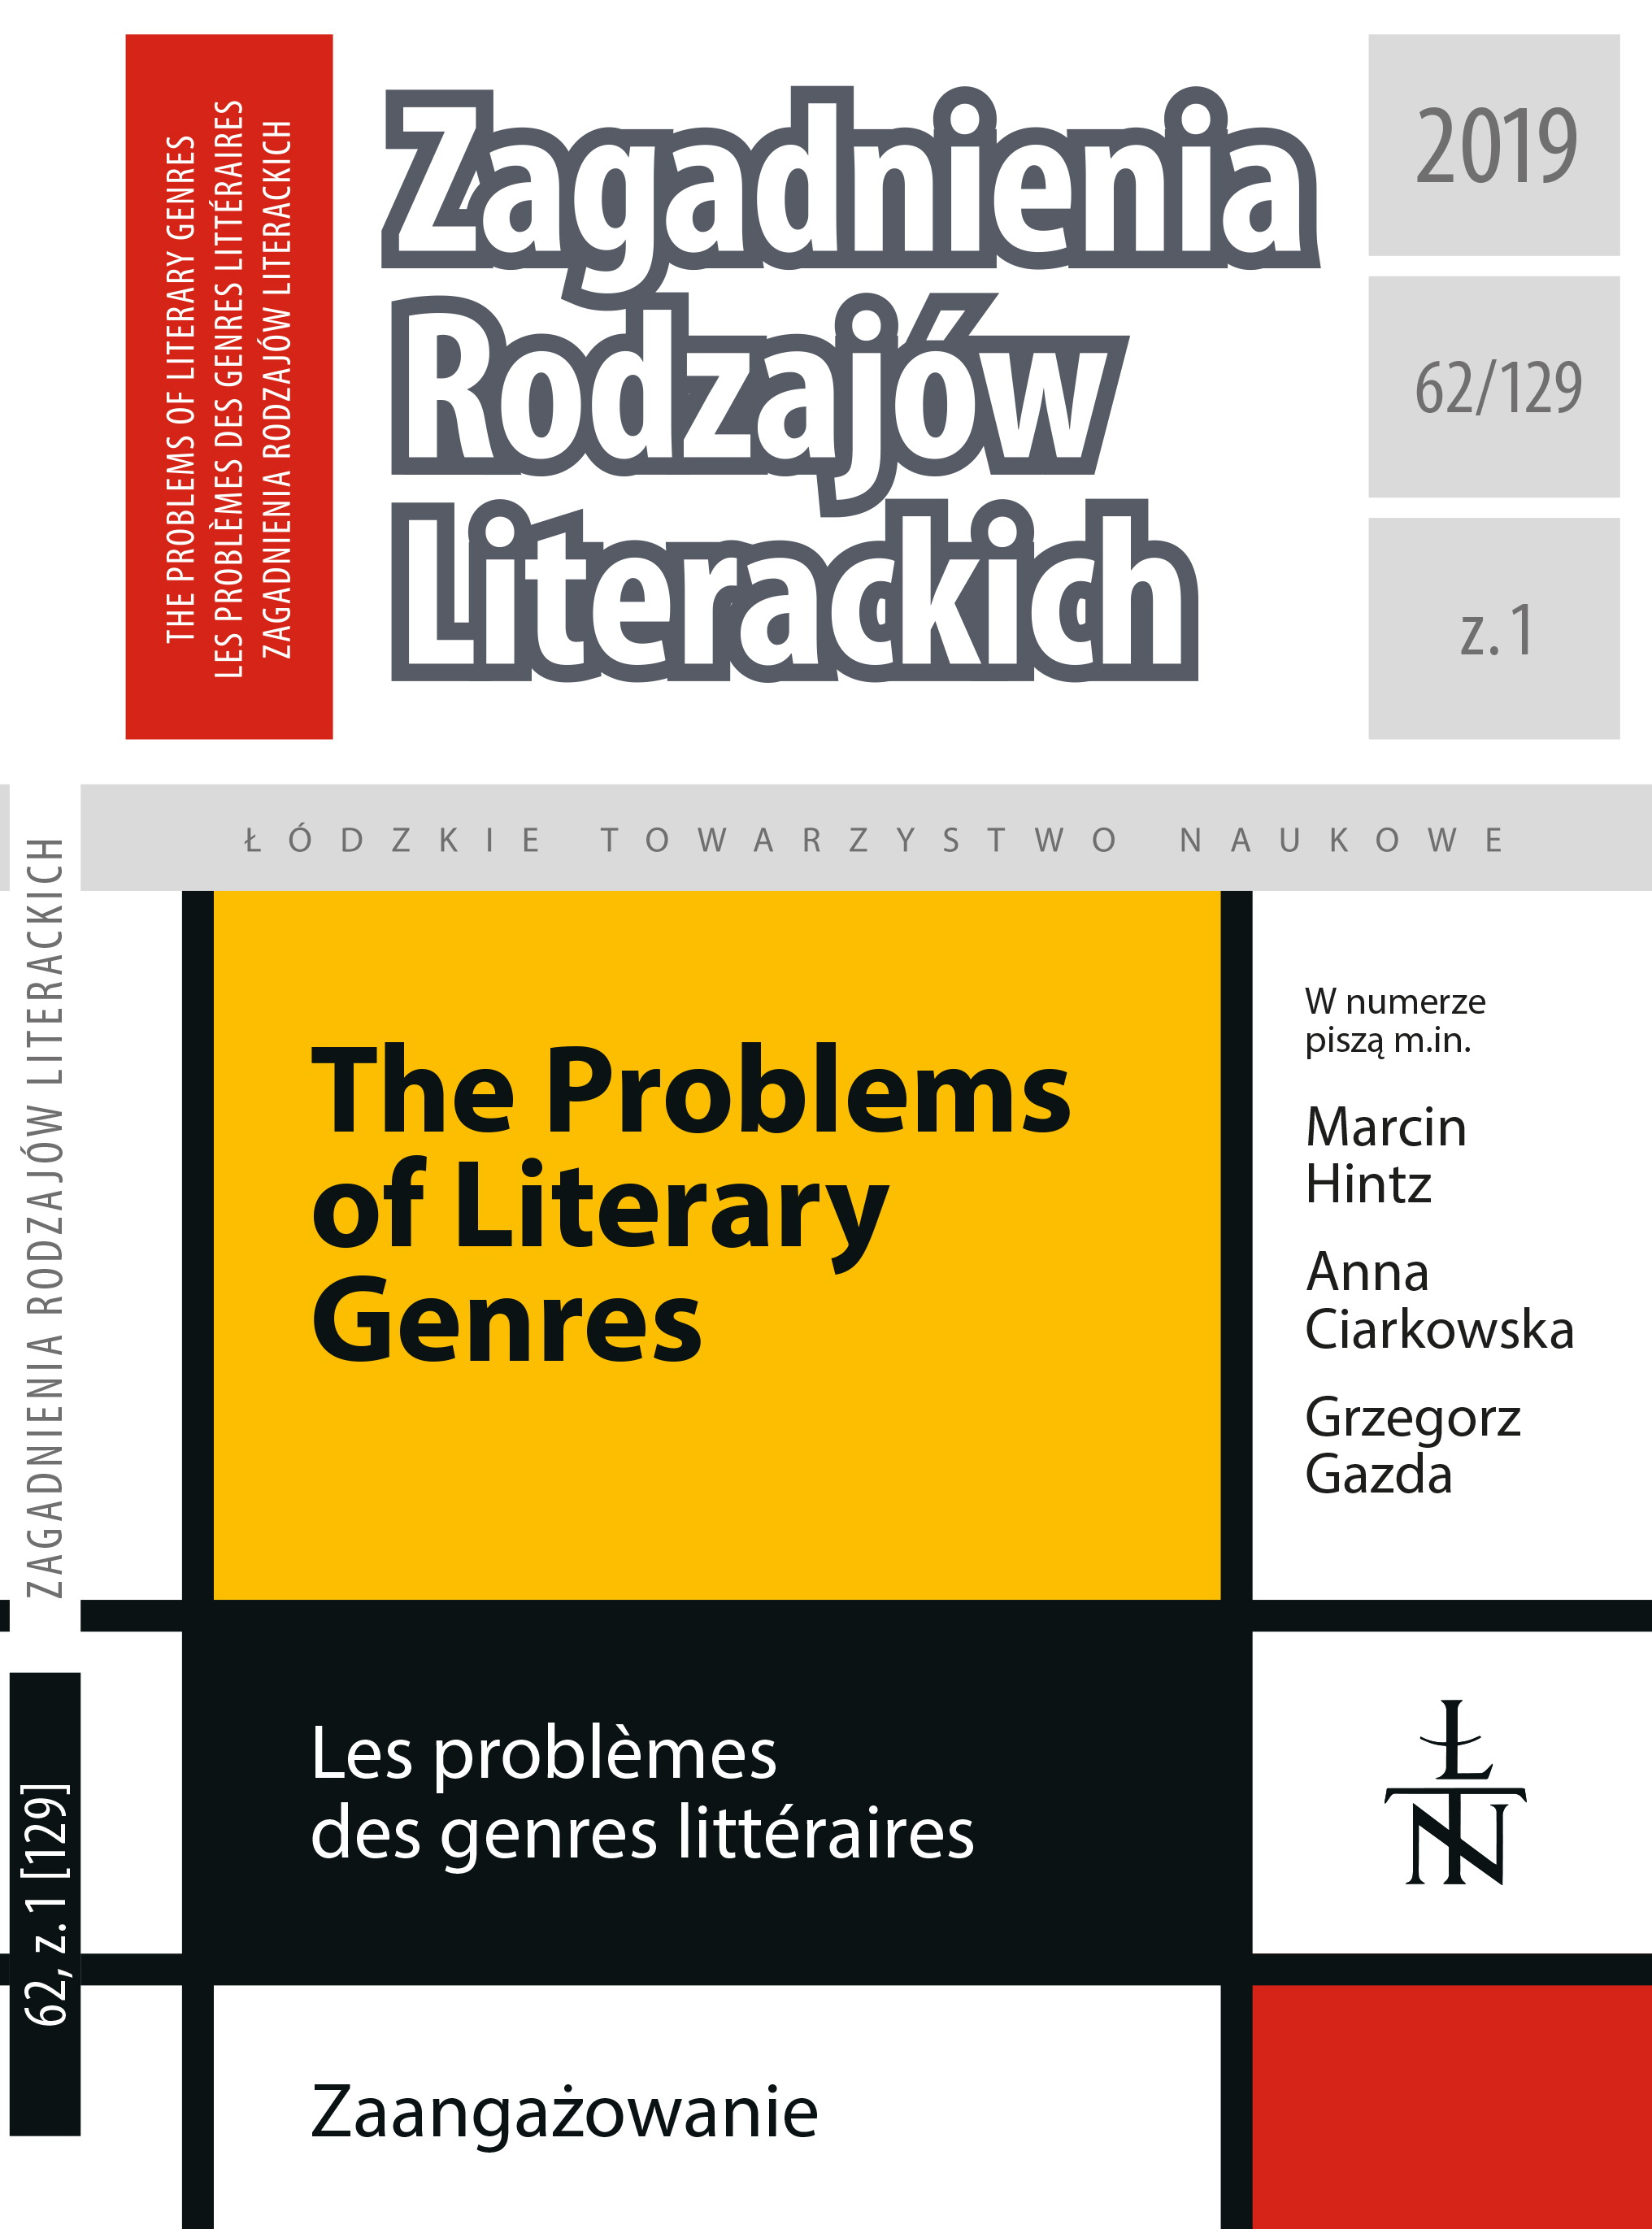 Circles of presence (about the river conversation entitled "Unforeseen time" by Grzegorz Wołowiec with Michał Głowiński) Cover Image